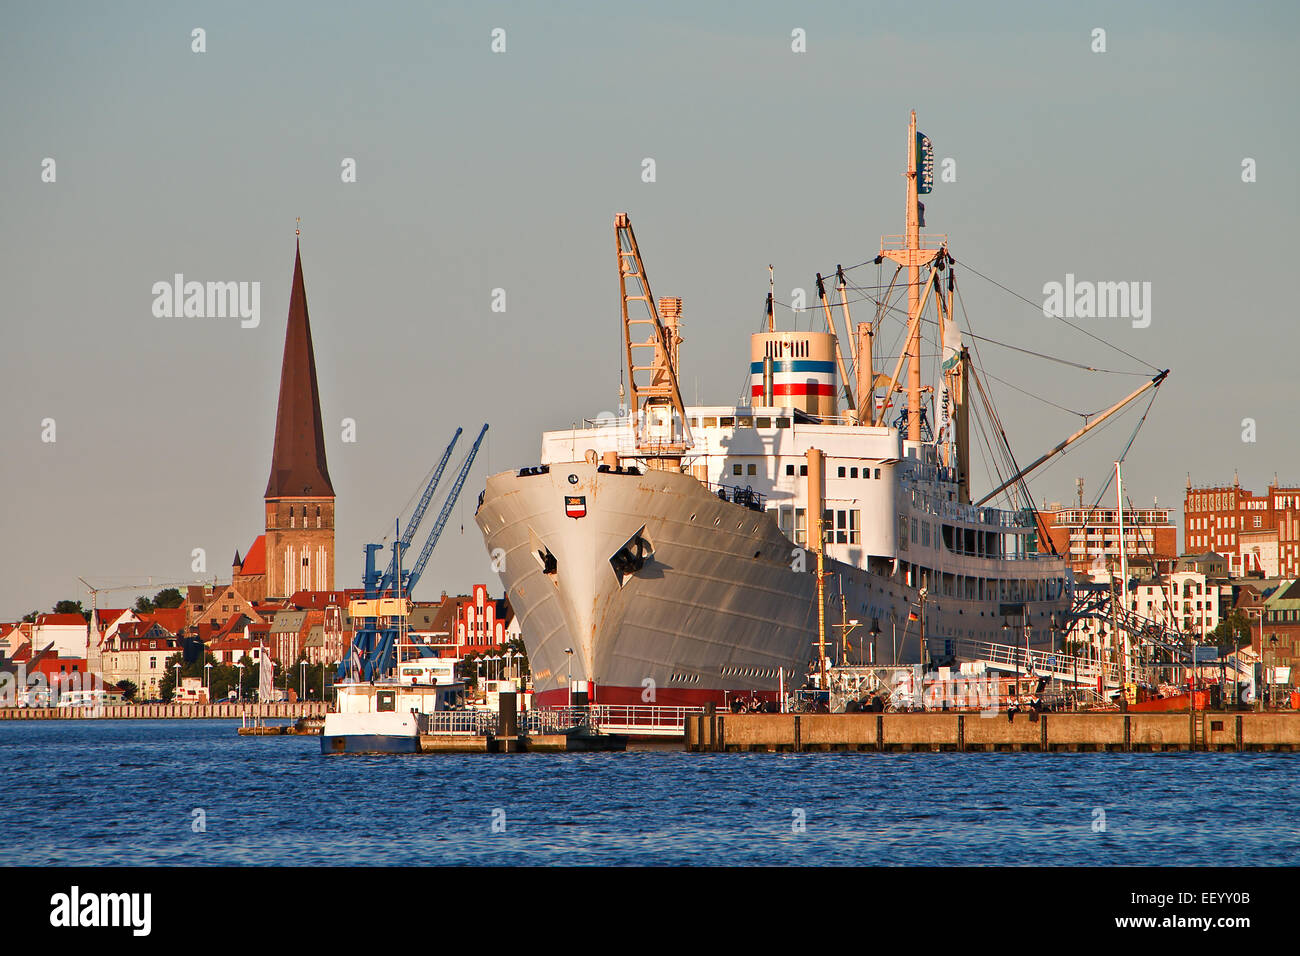 View of the port city of Rostock. Stock Photo